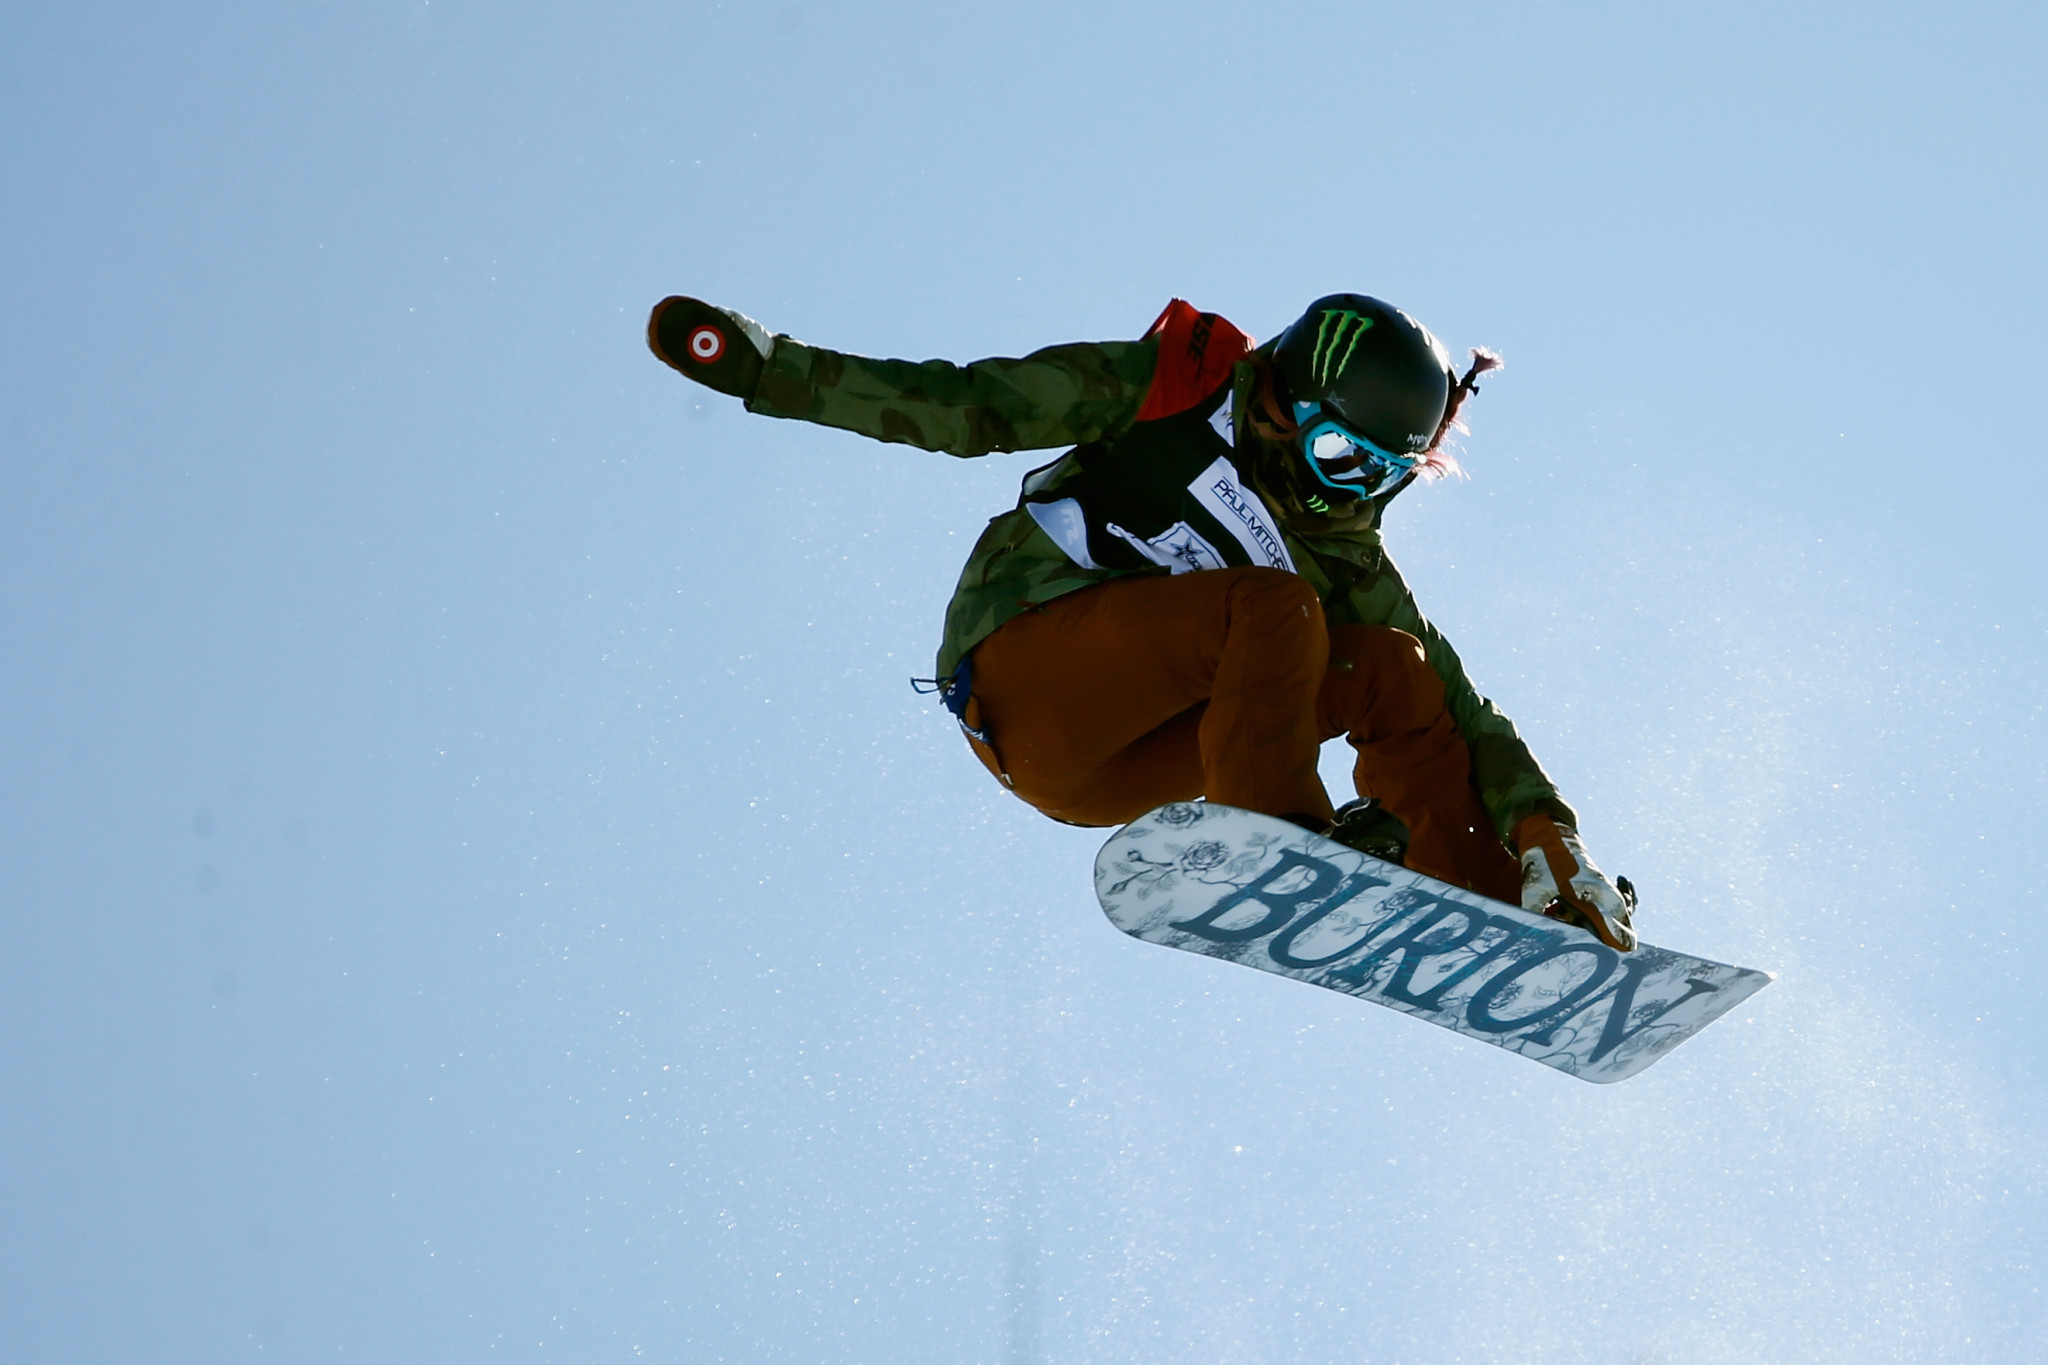 Kim earns repeat snowboard halfpipe victory at FIS World Cup event in Copper Mountain